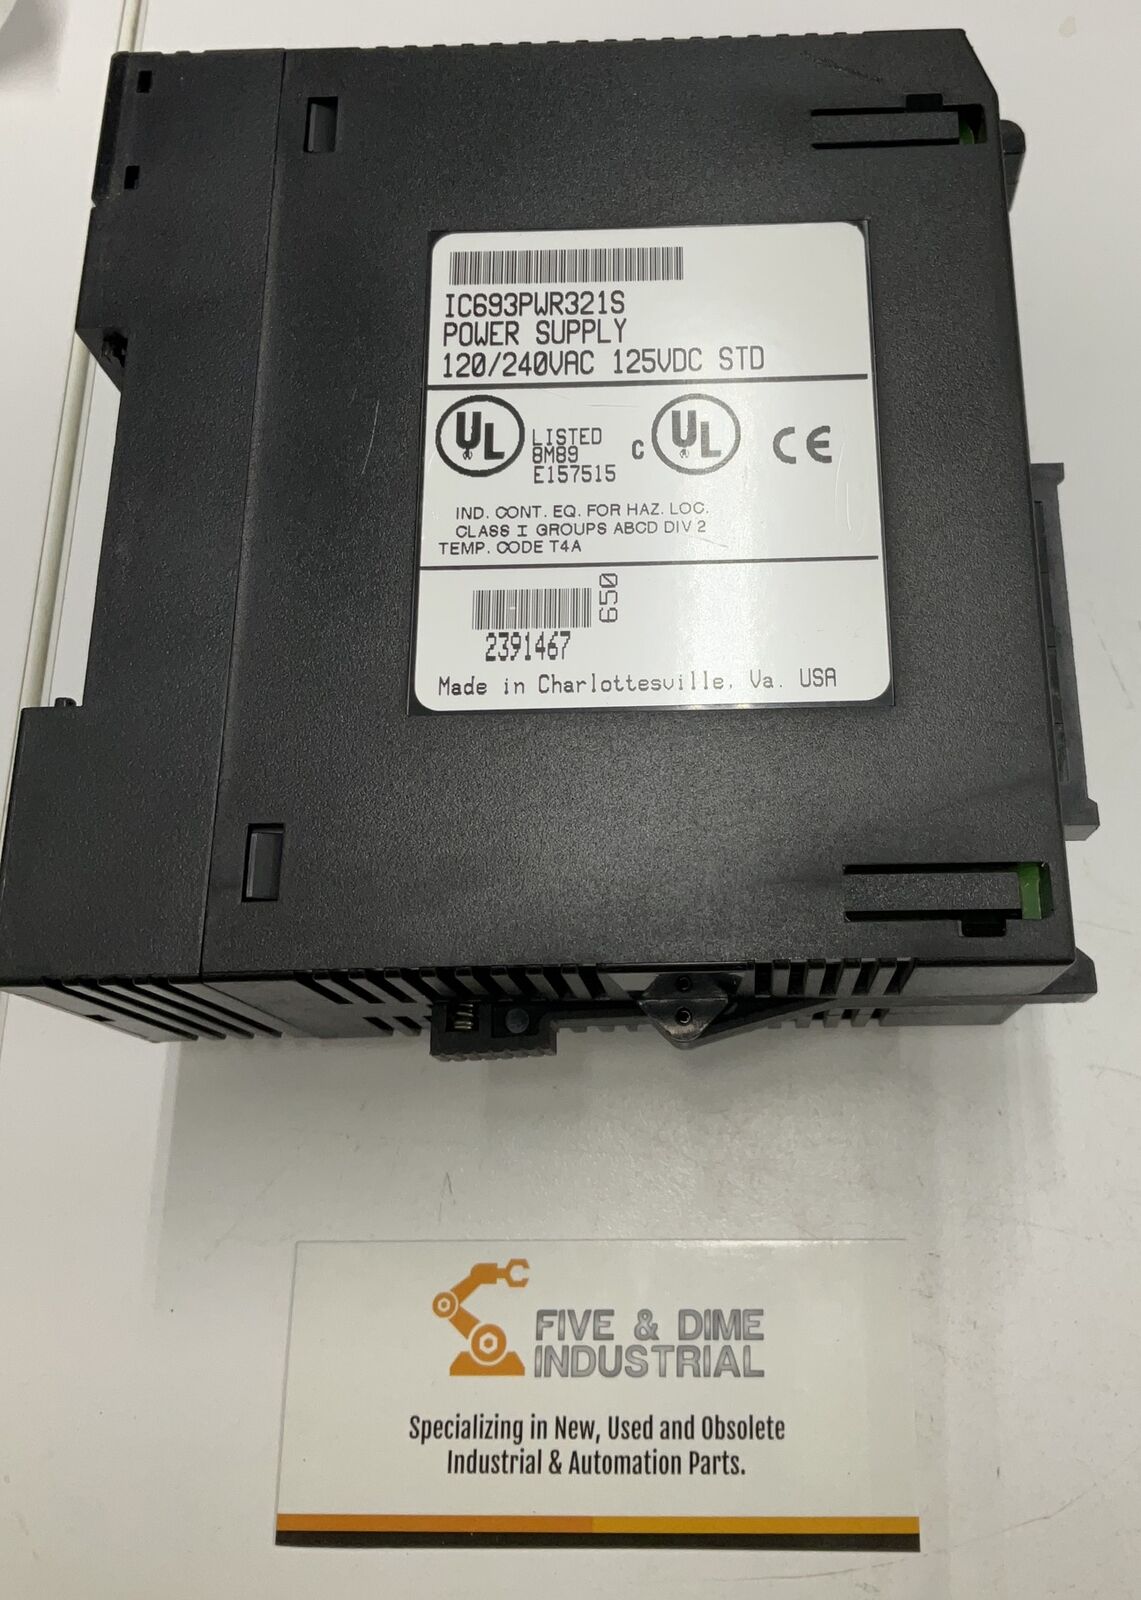 GE Fanuc IC693PWR321S Power Supply Series 90-30, 0.8A (BL115)